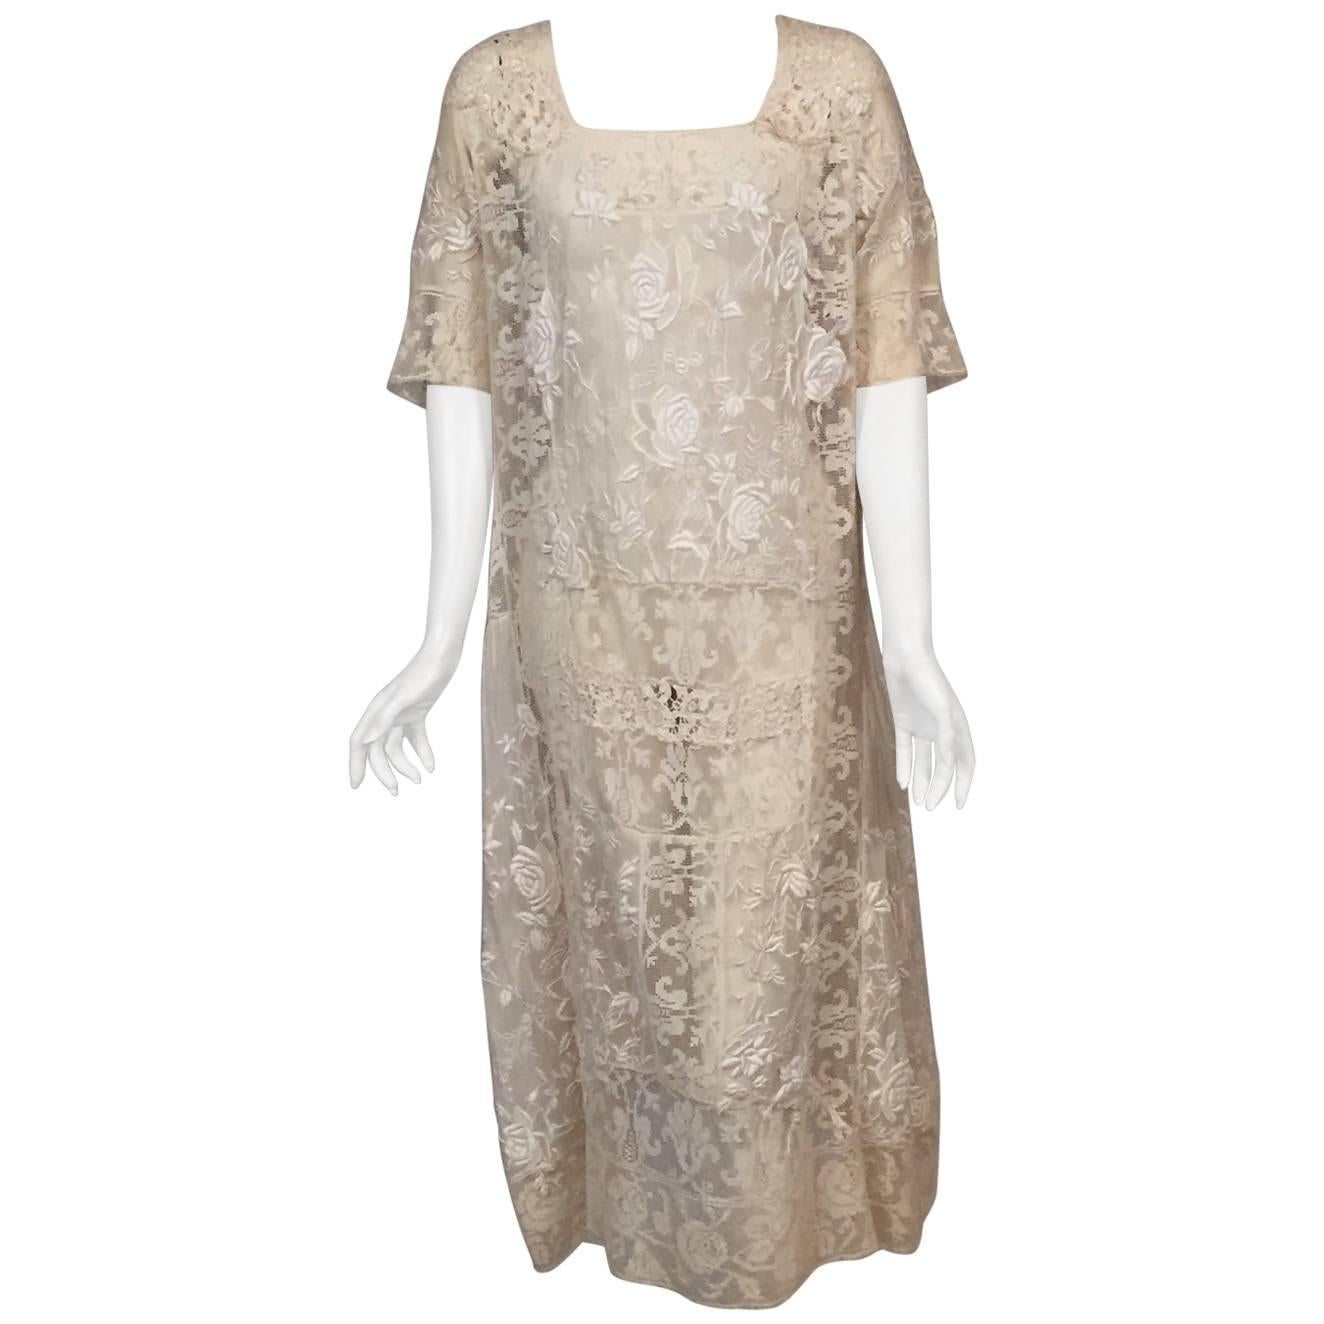 1920's Hand Made Mixed Lace and Embroidered Dress Rare Larger Size